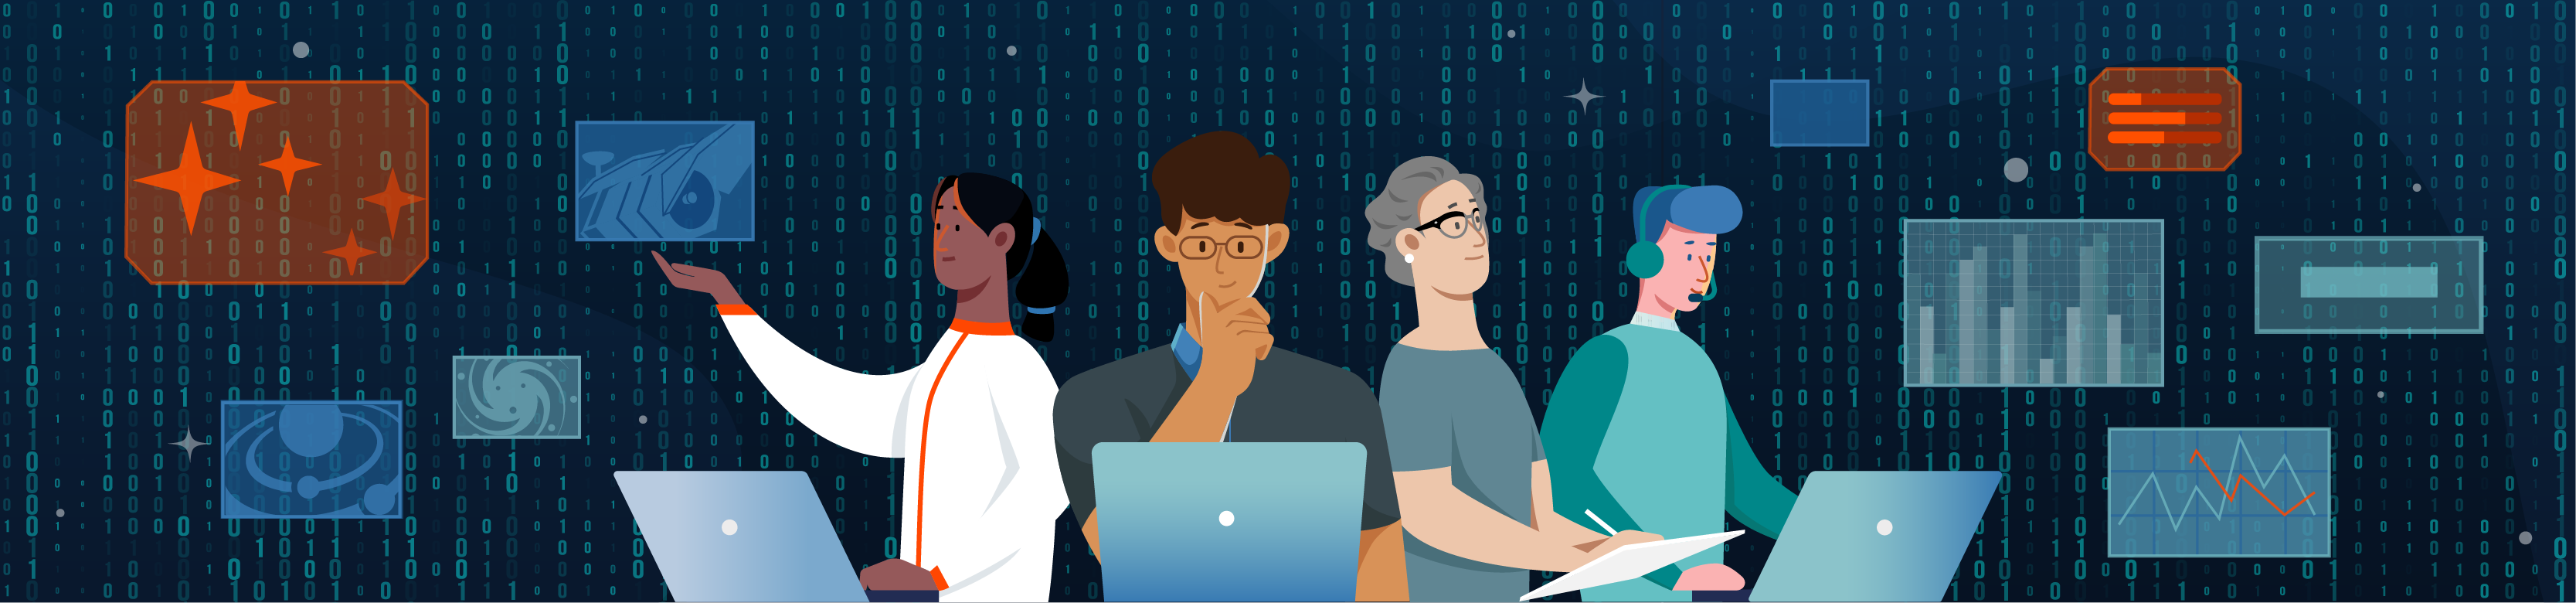 The banner image is animated in a playful retro style. Four people are centered over a dark background covered in zeros and ones reminescent of code. They have a range of skin tones, hair colors, ages, and genders. They are all using laptops with the exception of one older woman, matching the appearance of Nancy Grace Roman, who holds paper and pen. Floating around the figures are various rectangles containing various plots and images of stars and galaxies. One rectangle containing an animated representation of the Roman Space Telescope itself is being gestured at by the left most person.